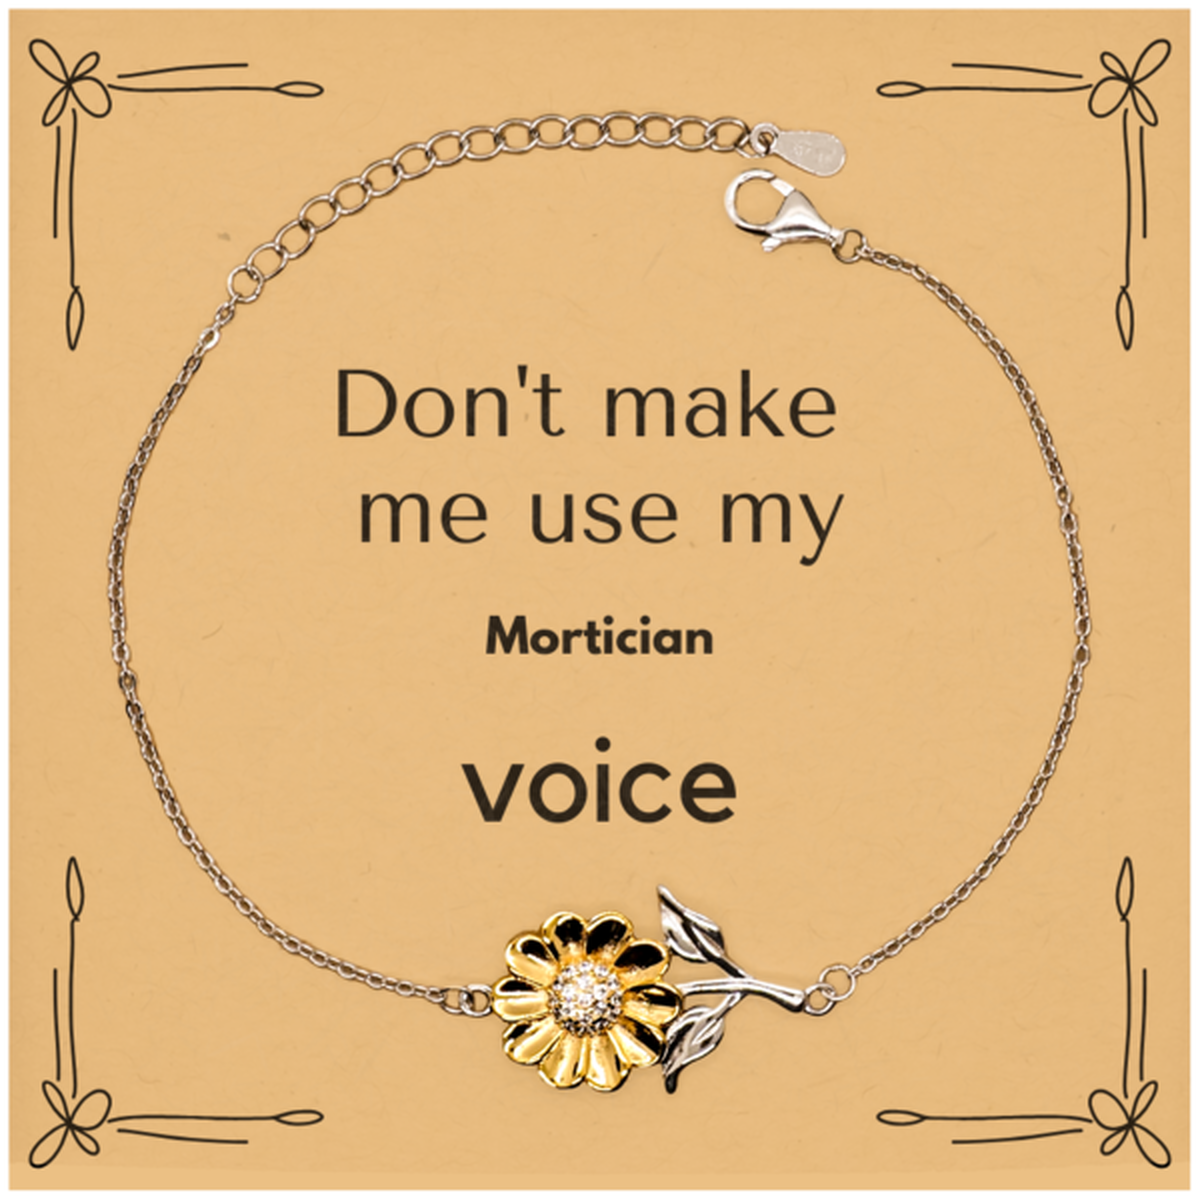 Don't make me use my Mortician voice, Sarcasm Mortician Card Gifts, Christmas Mortician Sunflower Bracelet Birthday Unique Gifts For Mortician Coworkers, Men, Women, Colleague, Friends